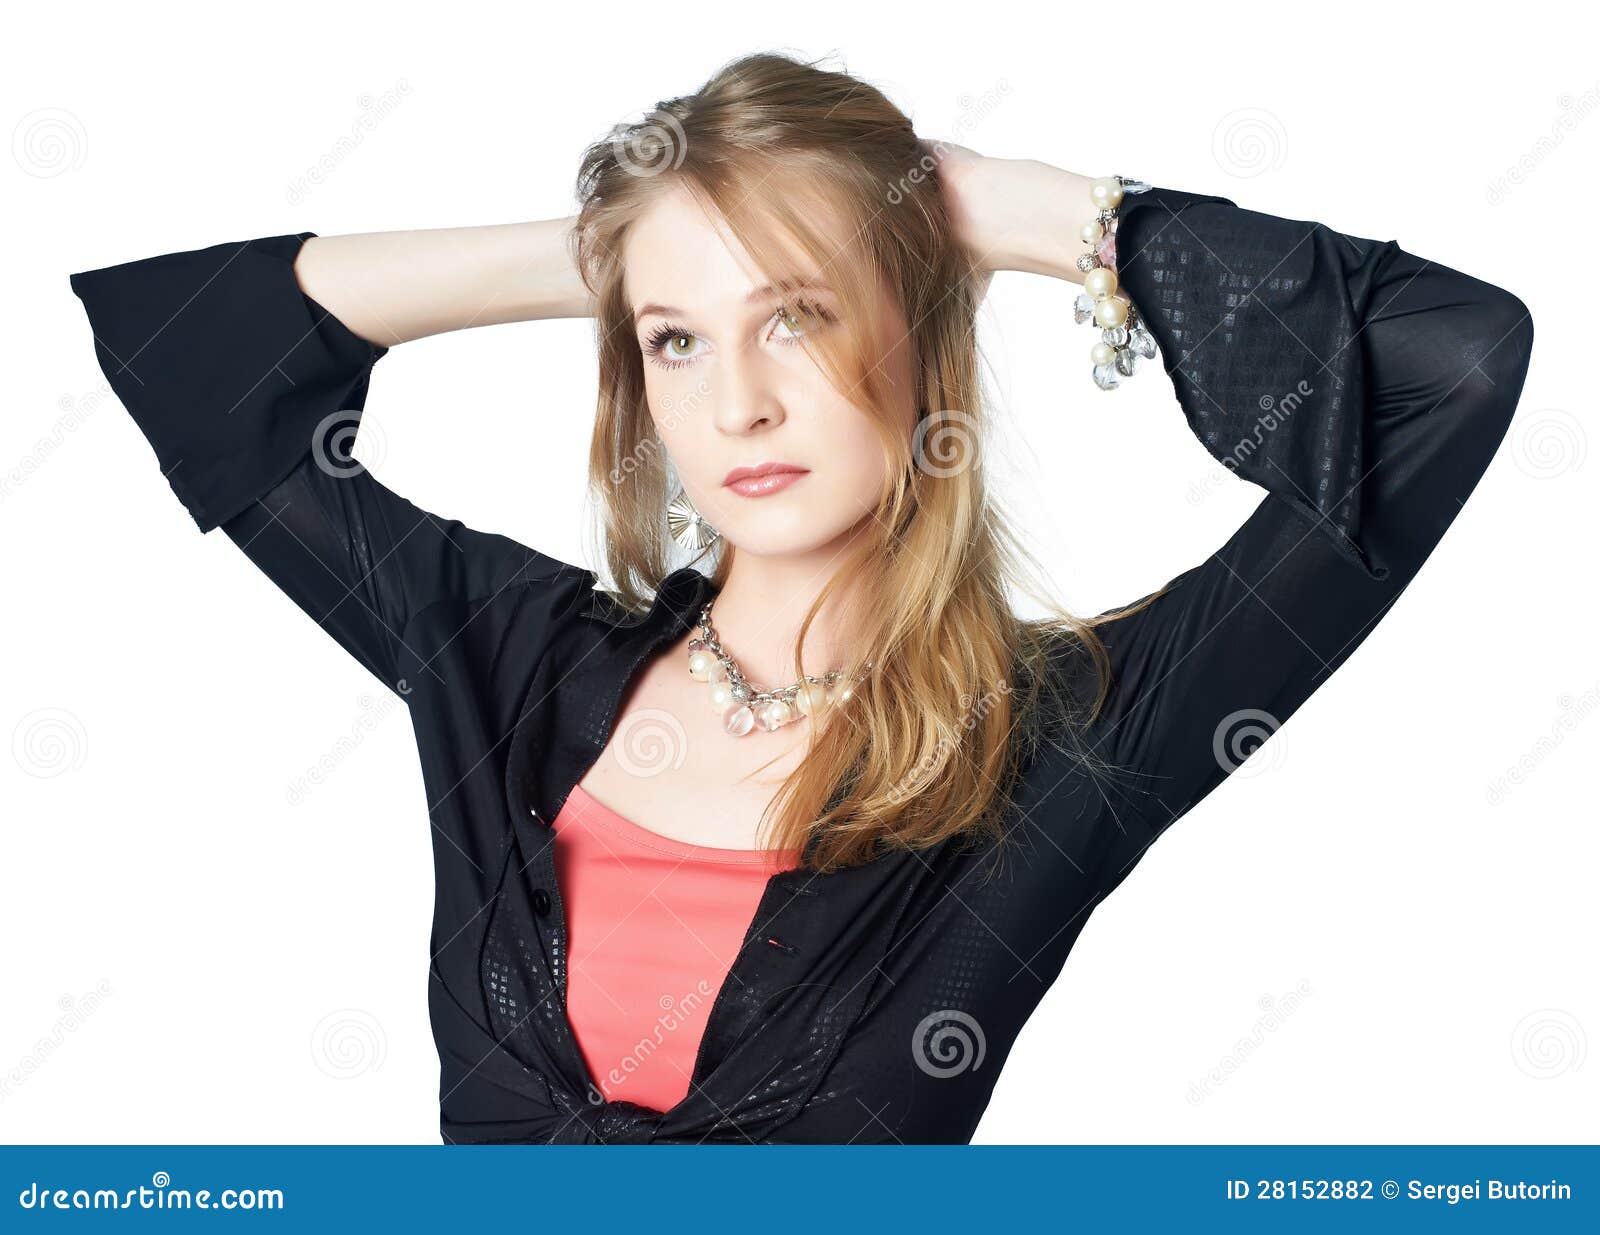 Slim woman stock photo. Image of clothing, lady, attractive - 28152882